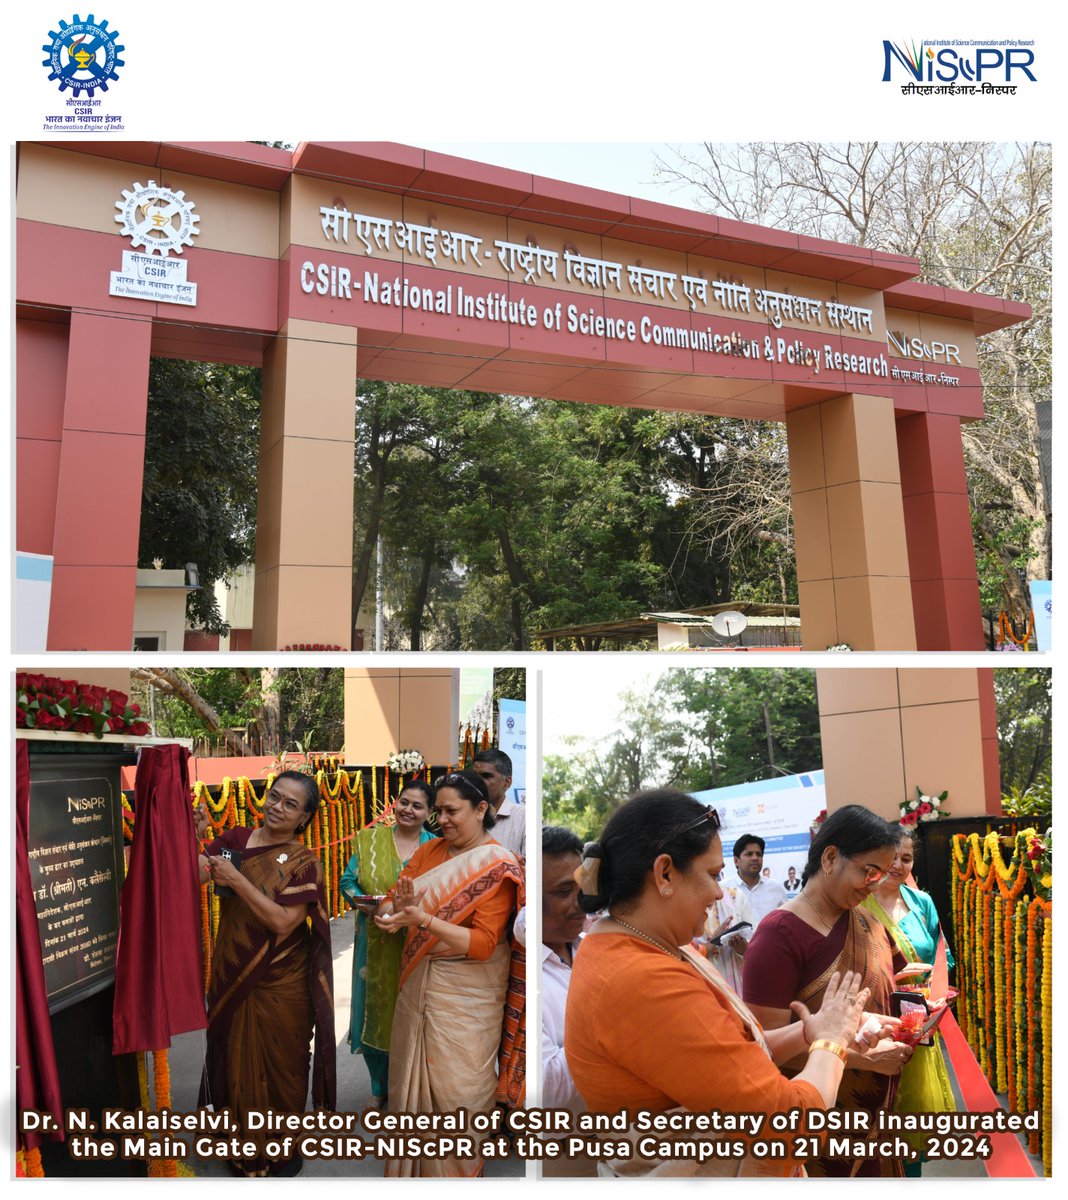 Dr. @DrNKalaiselvi , Director General of @CSIR_IND and Secretary of DSIR inaugurated the Main Gate of the CSIR-National Institute of Science Communication and Policy Research (CSIR-NIScPR) at the Pusa Campus on 21 March, 2024 @Ranjana_23 @PIB_India @DDNational @AkashvaniAIR